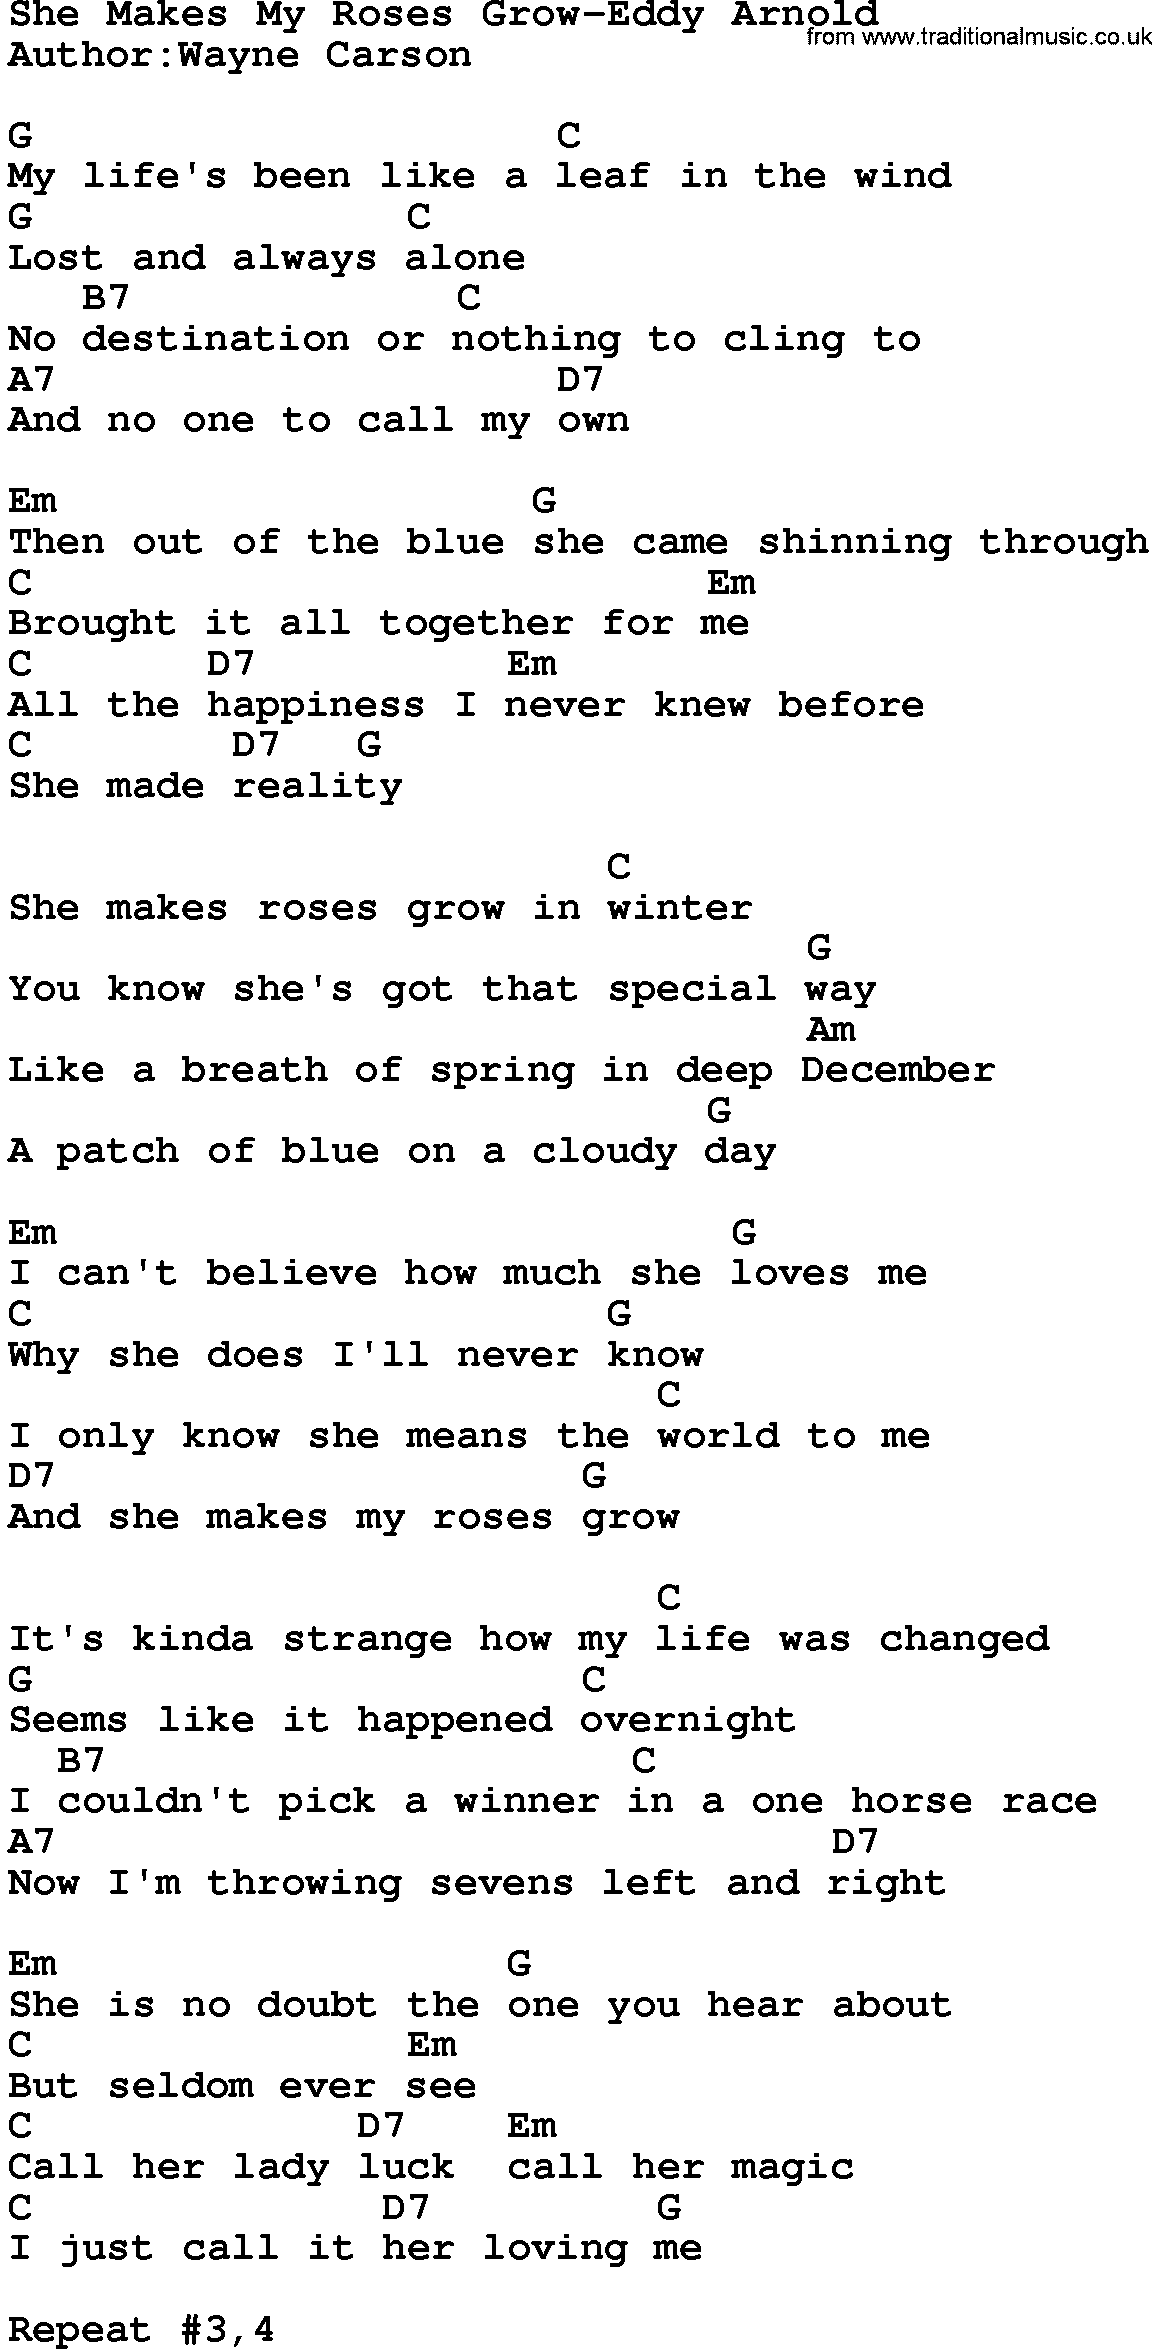 Country music song: She Makes My Roses Grow-Eddy Arnold lyrics and chords